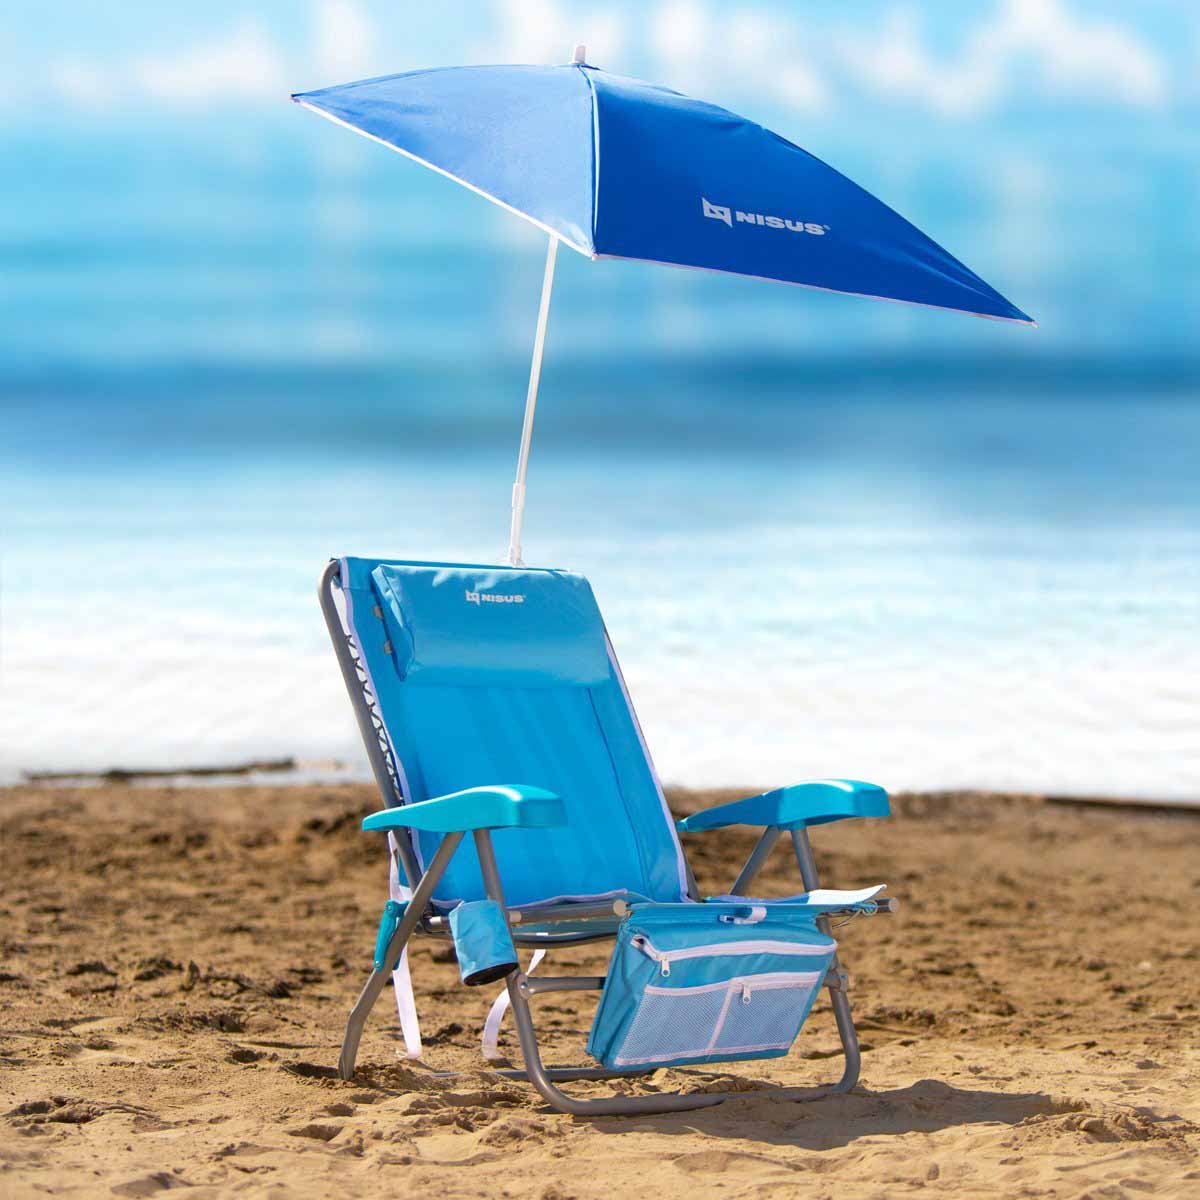 Premium Backpack Beach Chair with Cooler Bag and Headrest, Blue on the beach sand with a blue Strong Clip Adjustable Umbrella